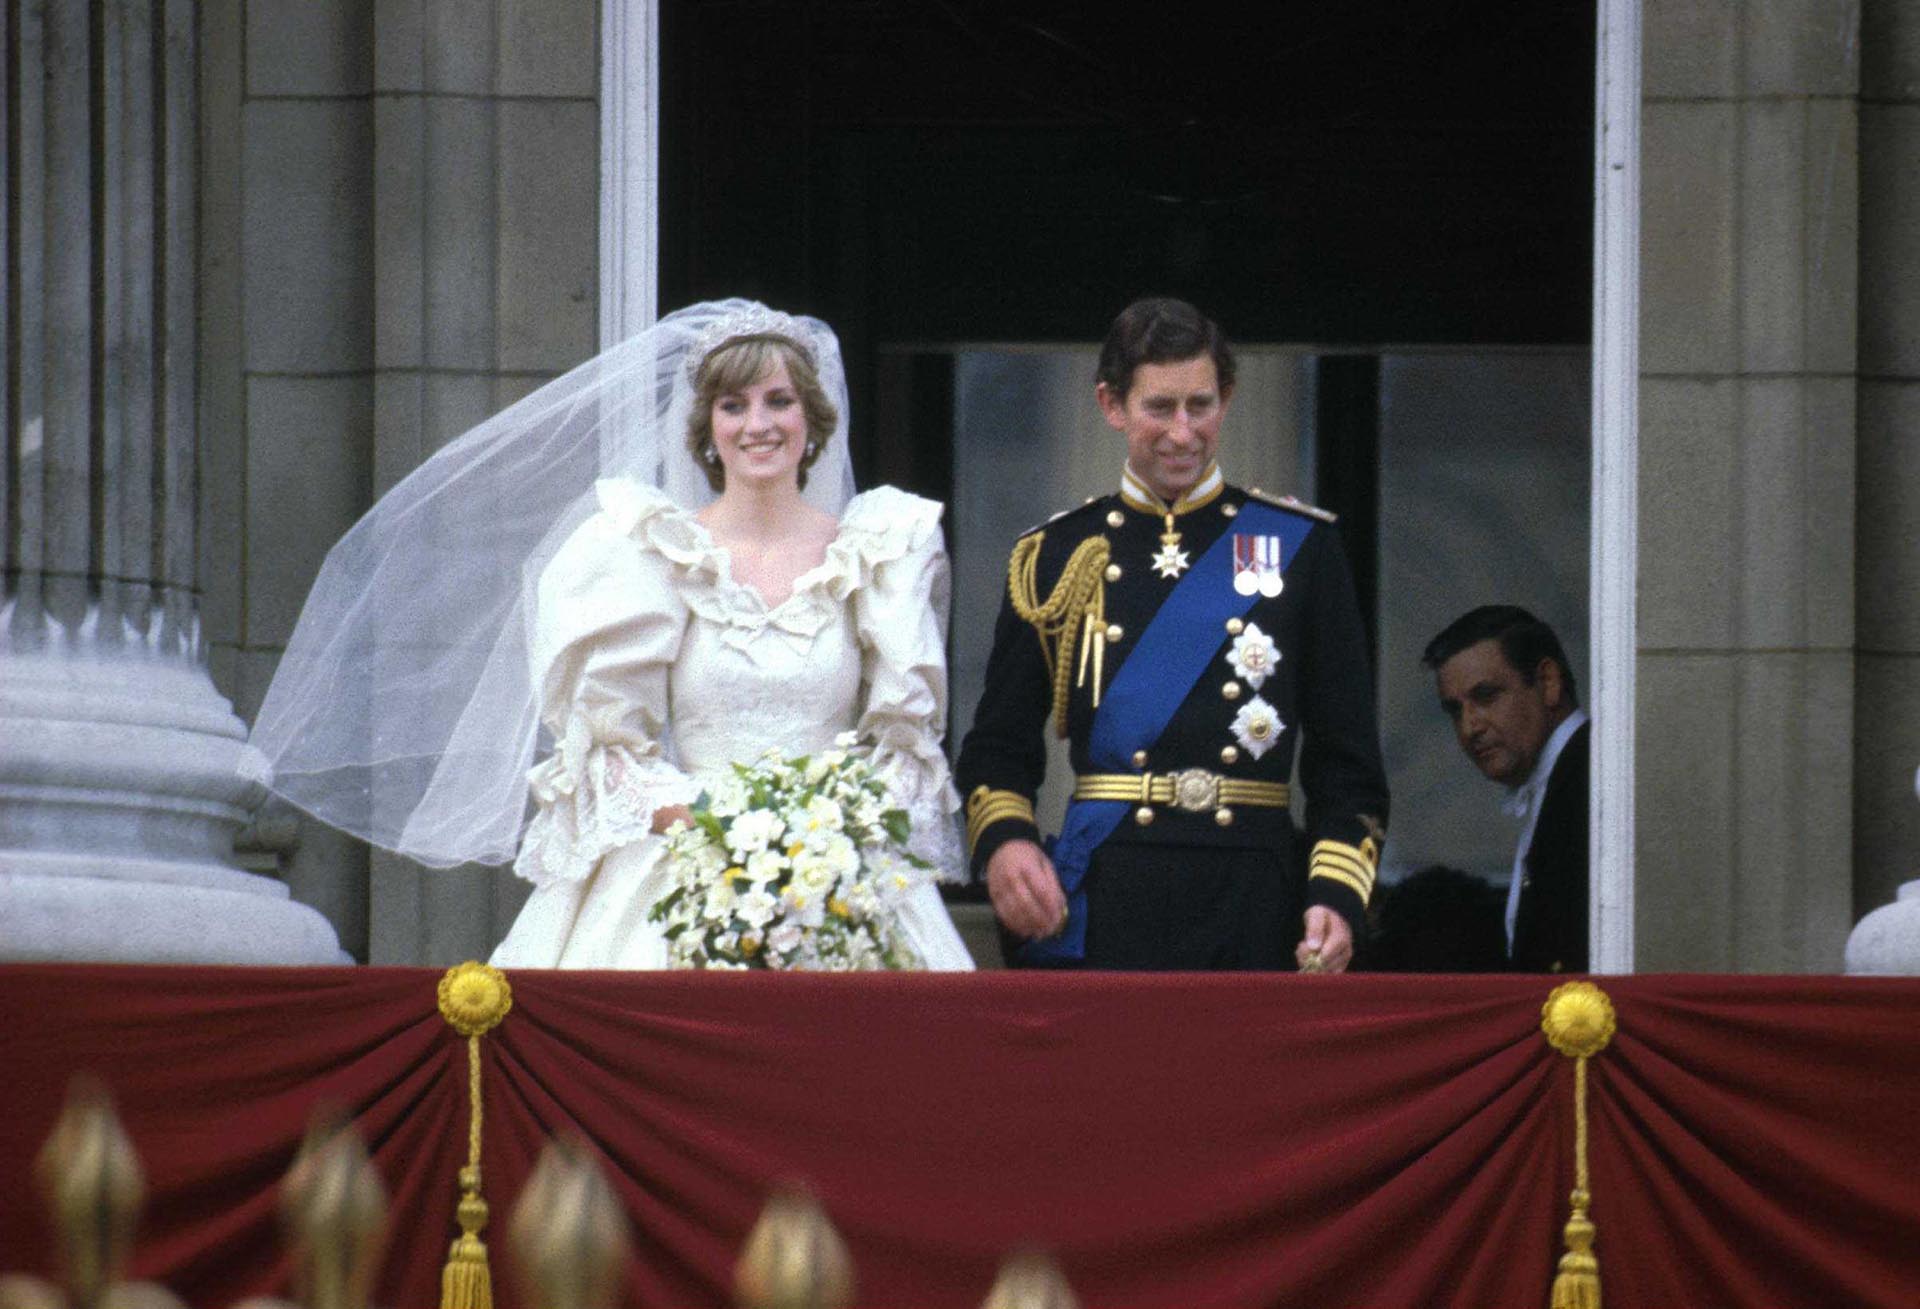 Prince Charles & Princess Diana (1961 - 1997) stand on the balcony of Buckingham Palace after their wedding ceremony at St. Paul